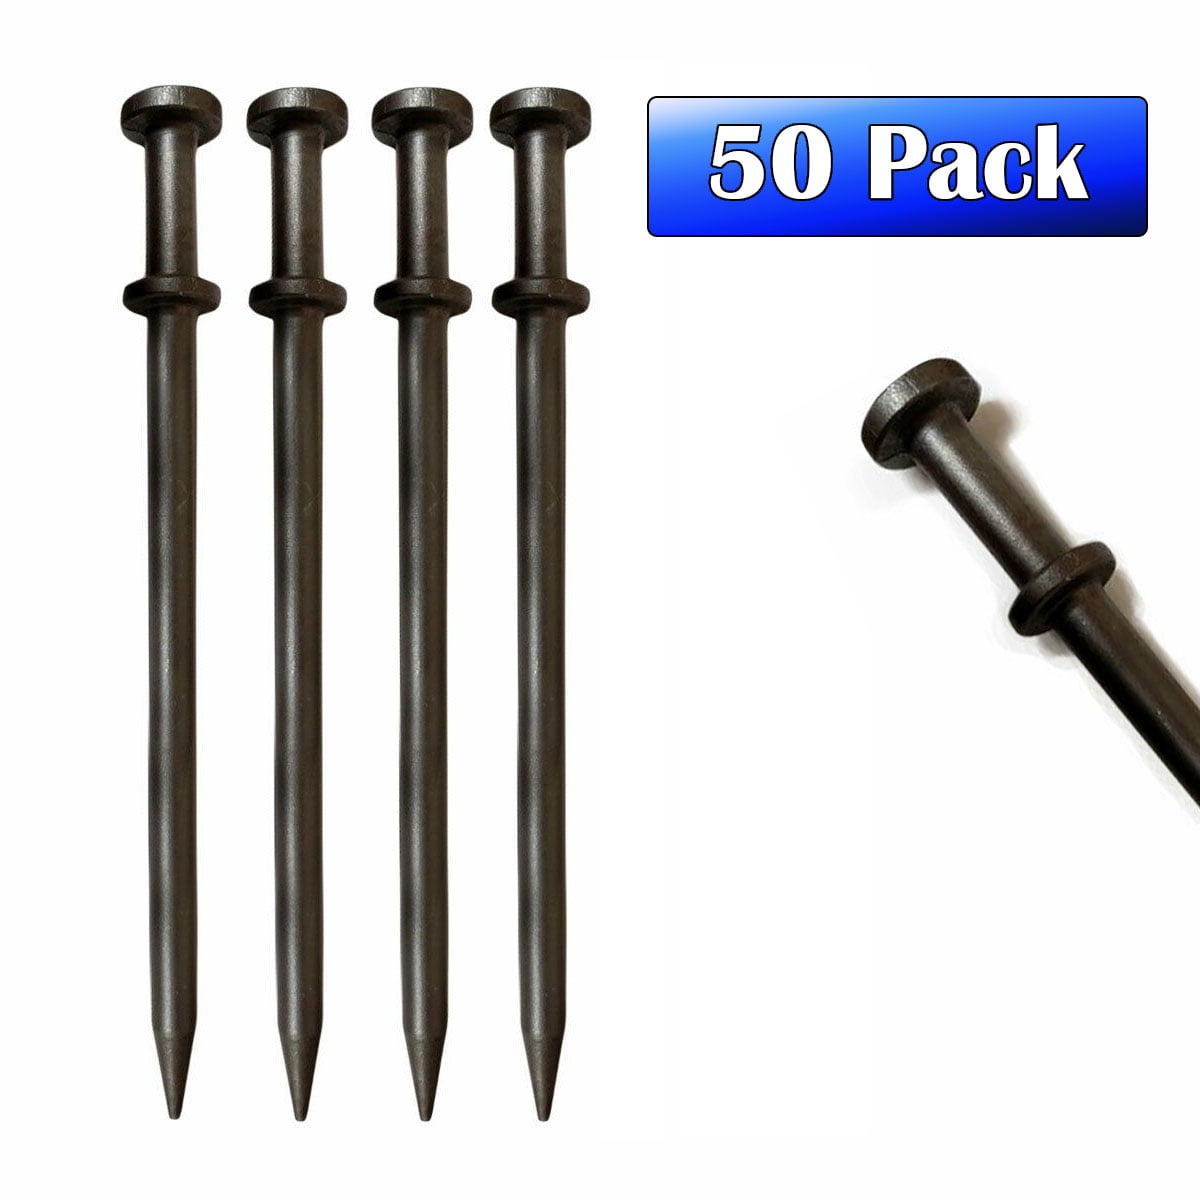 1x20 Double Head Steel Stakes, 50 Pack ASTM Standard for Small ...